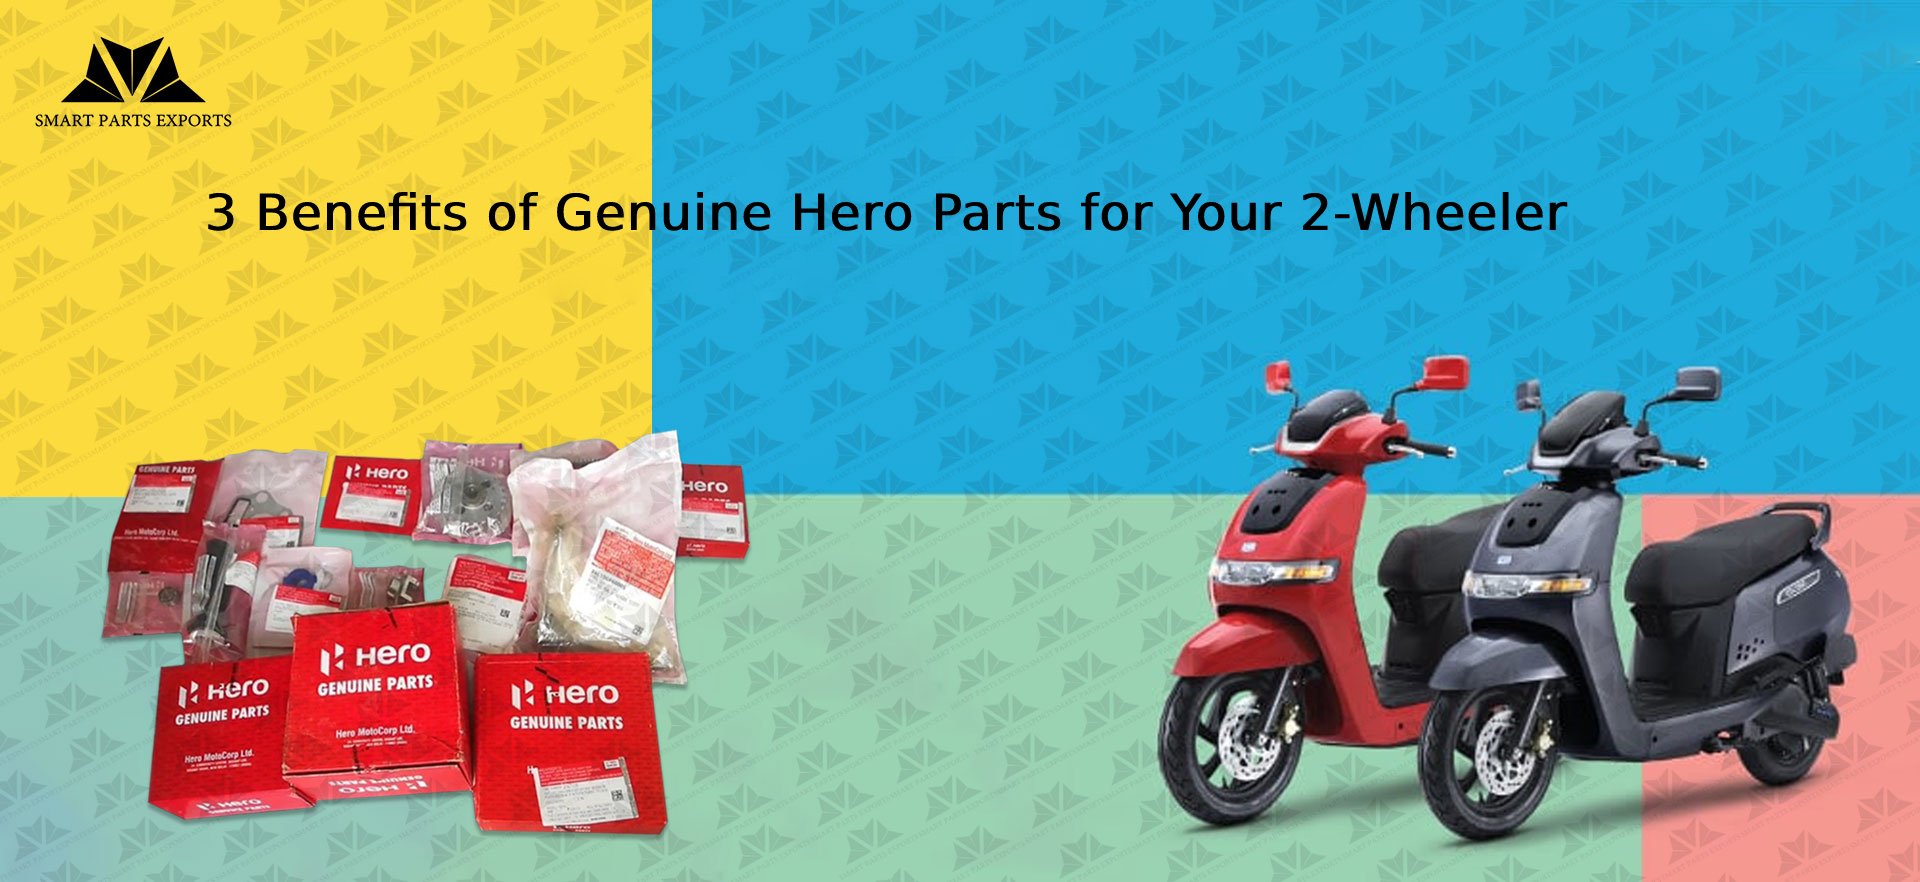 3 Benefits of Hero Genuine Parts for Your 2-Wheeler vehicle